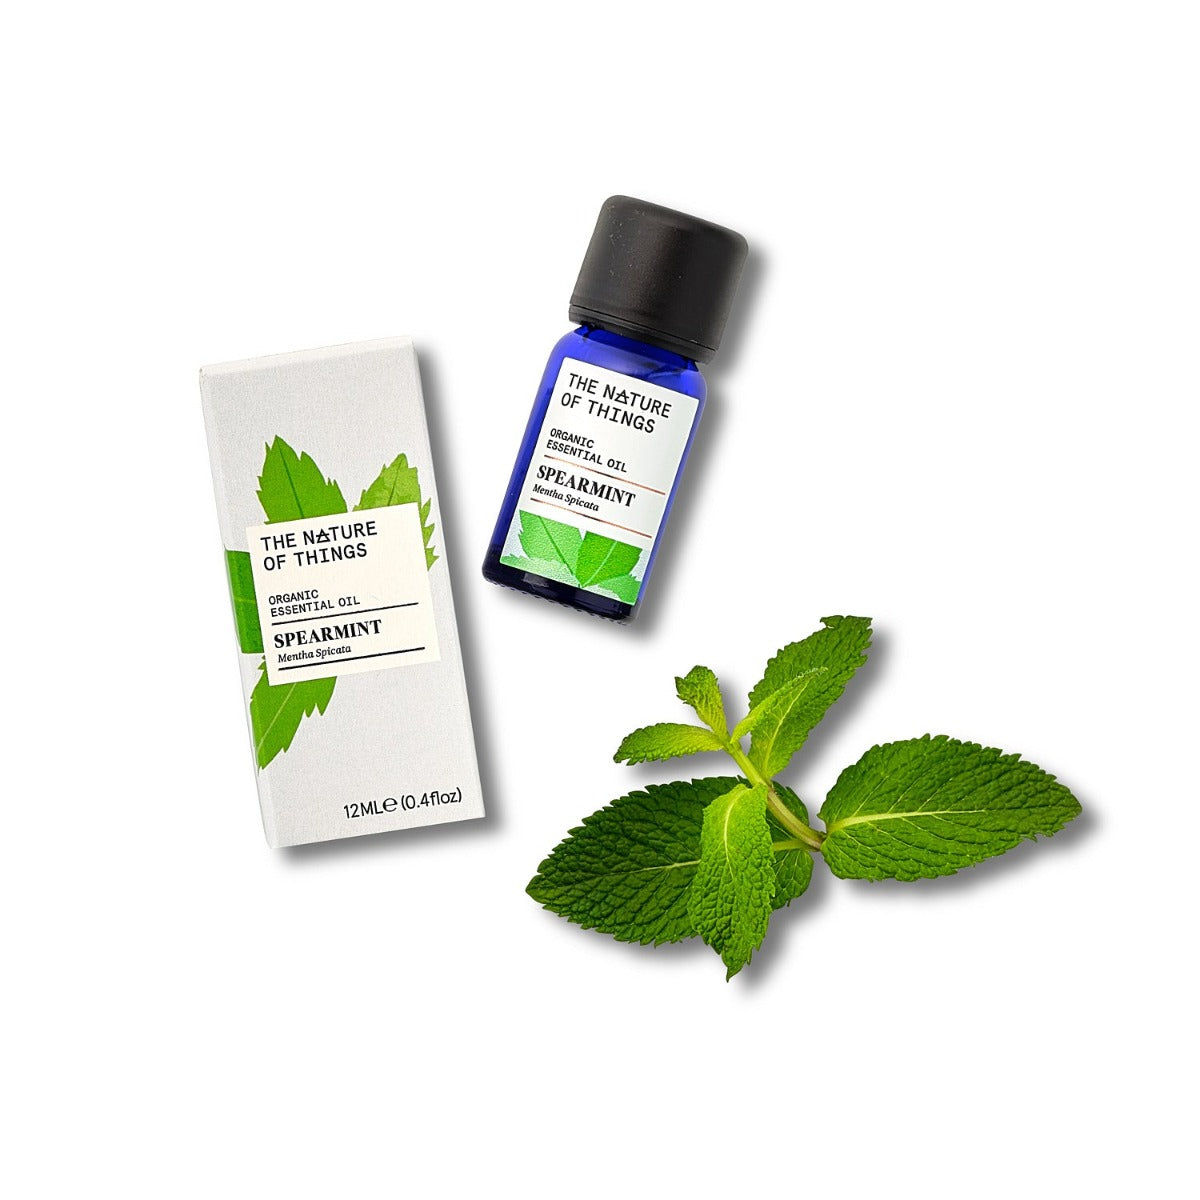 Organic Spearmint Essential Oil from The Nature of Things